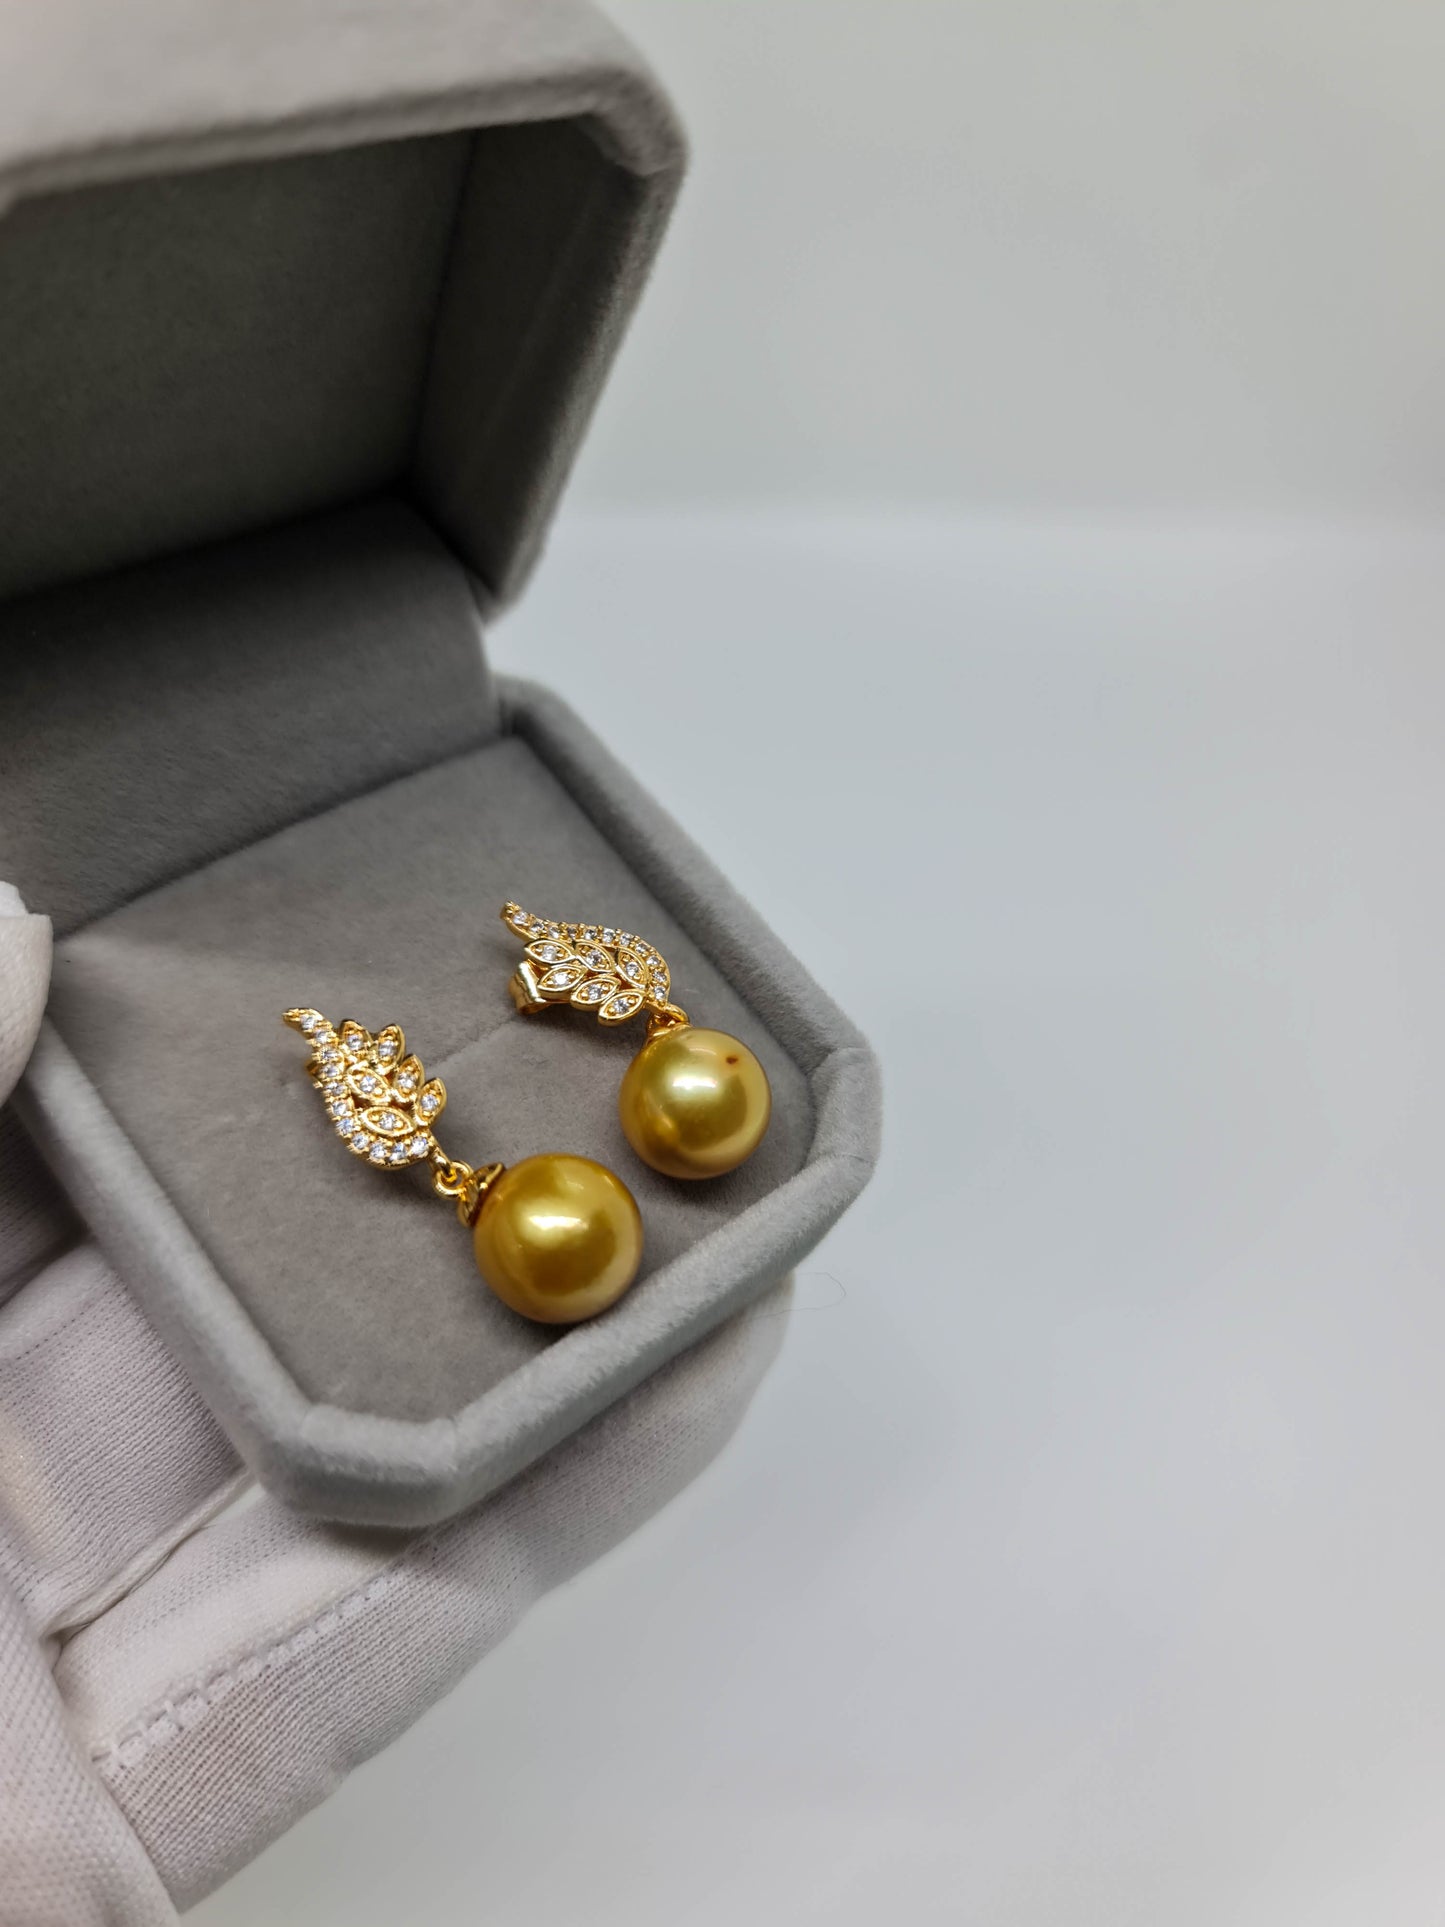 10.5mm Deep Golden South Sea Pearls Earrings in 5Microns Gold Plated